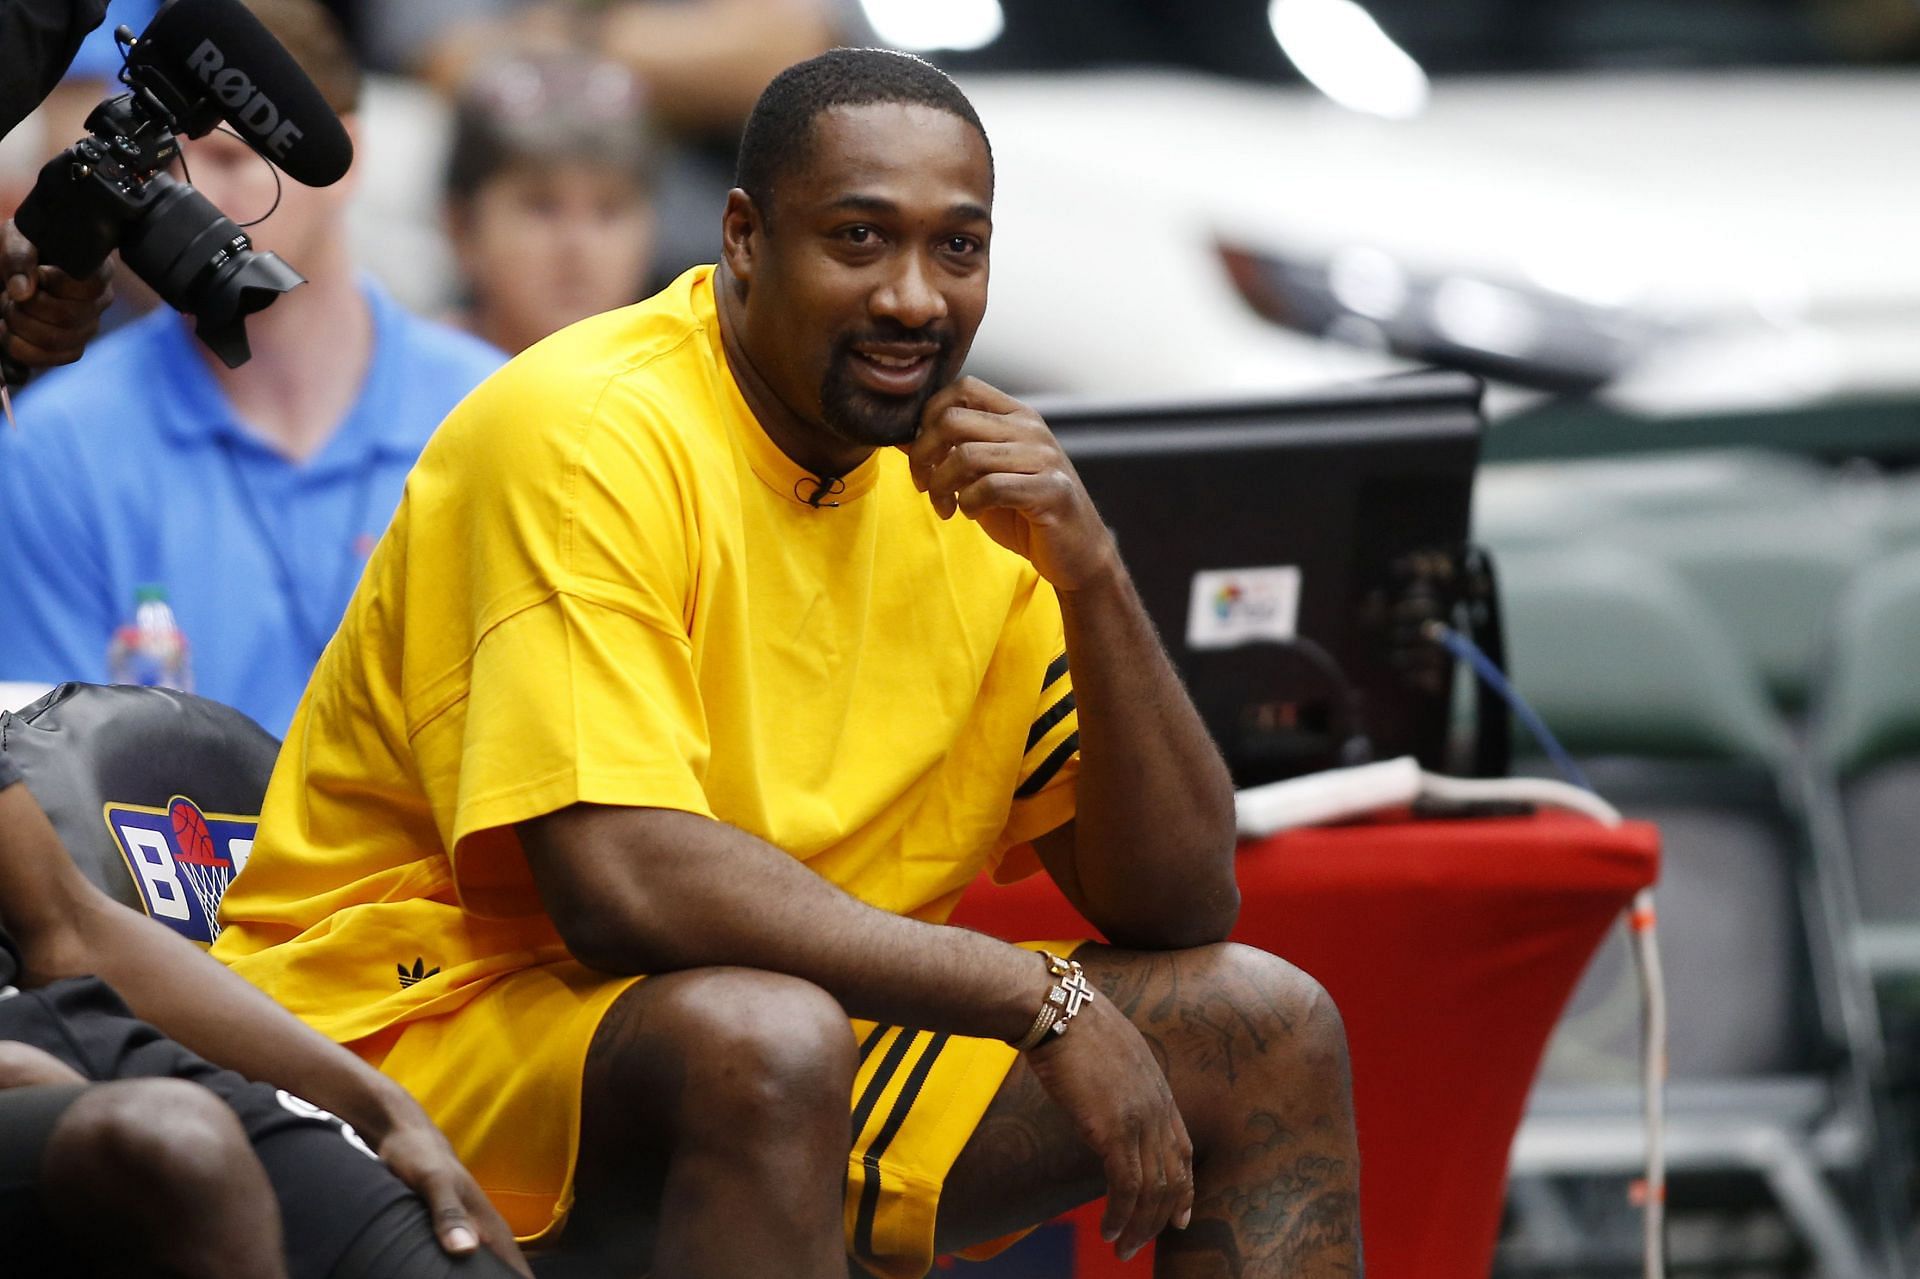 Gilbert Arenas tried out for the LA Lakers before the 2011-12 season.